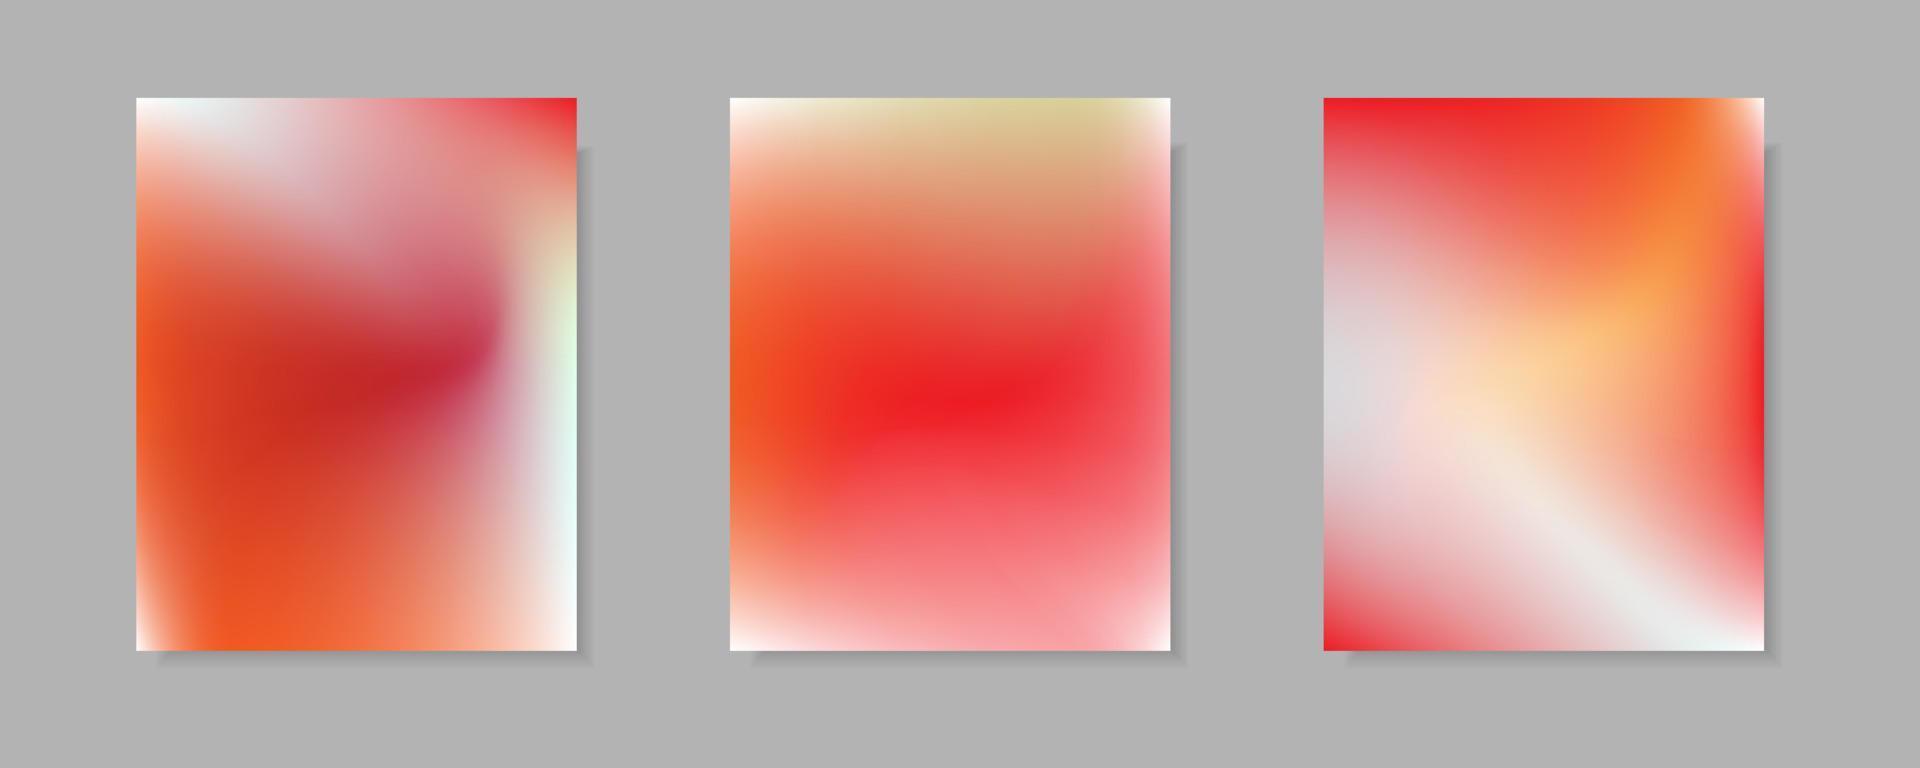 a collection of abstract orange, red and white gradient vector cover backgrounds. for business brochure backgrounds, cards, wallpapers, posters and graphic designs. illustration template